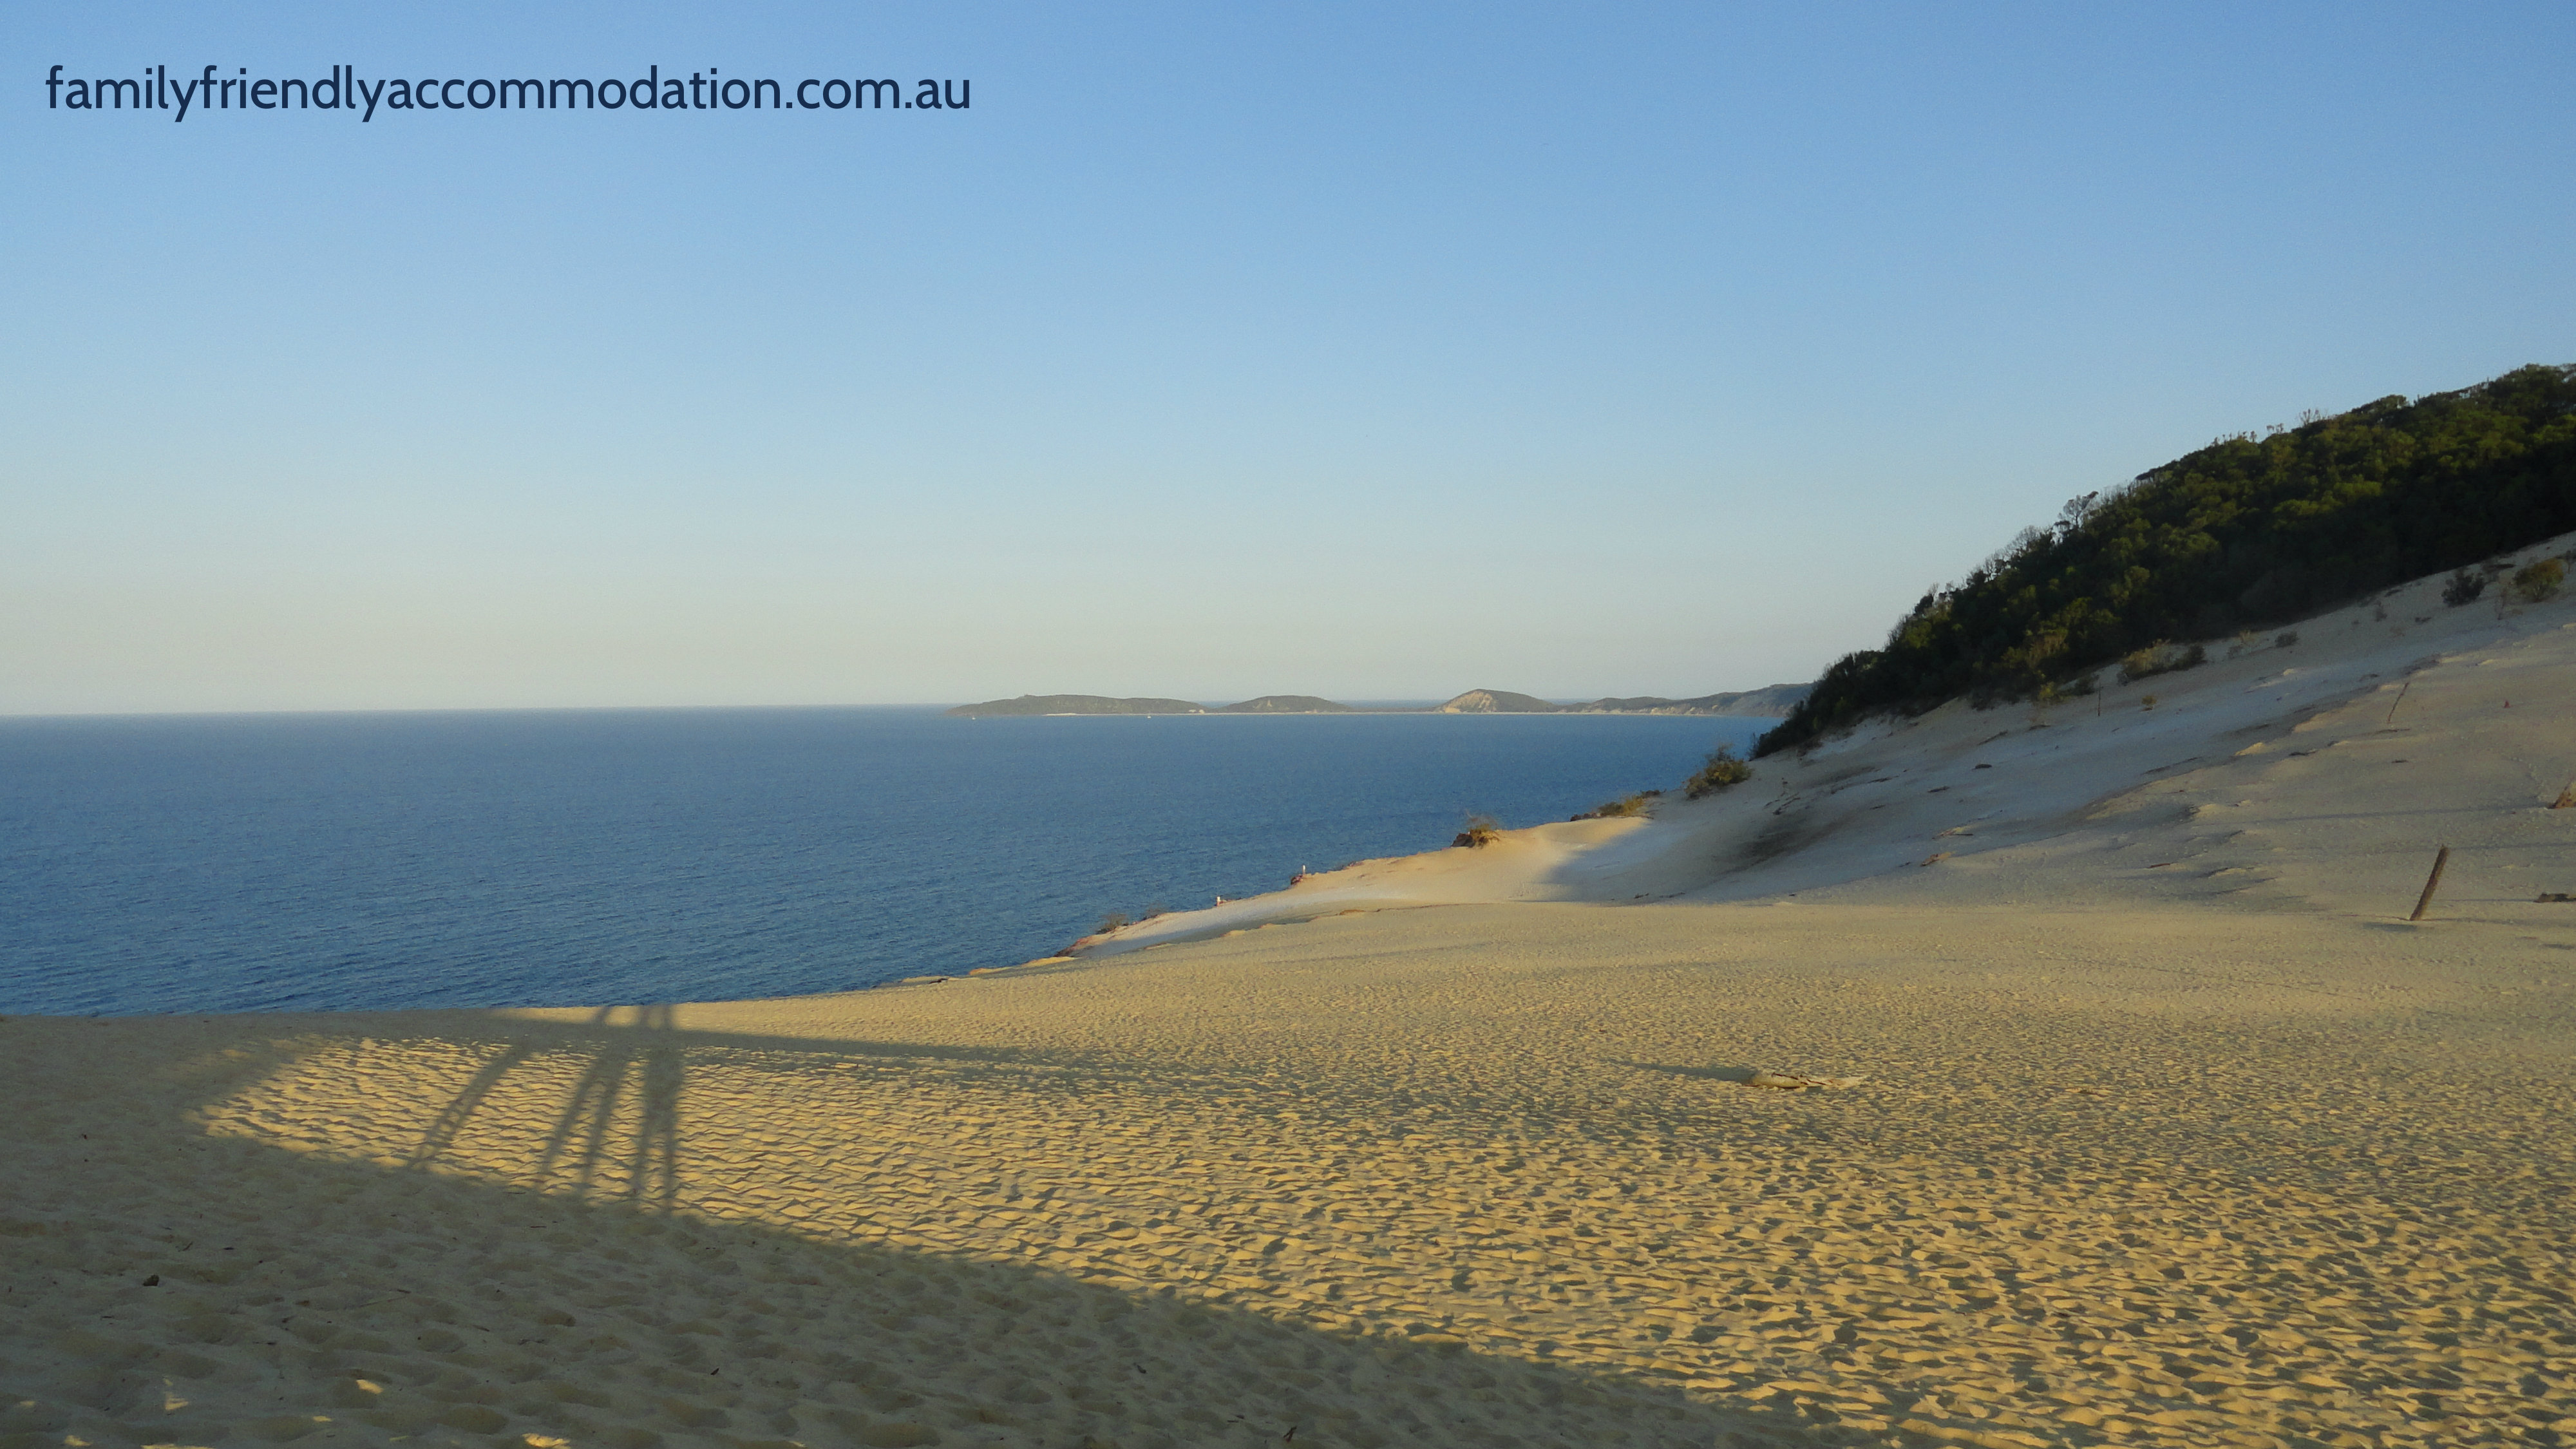 Carlo Sand Blow at Rainbow Beach - your kids will love it. And the sunset is just gorgeous.